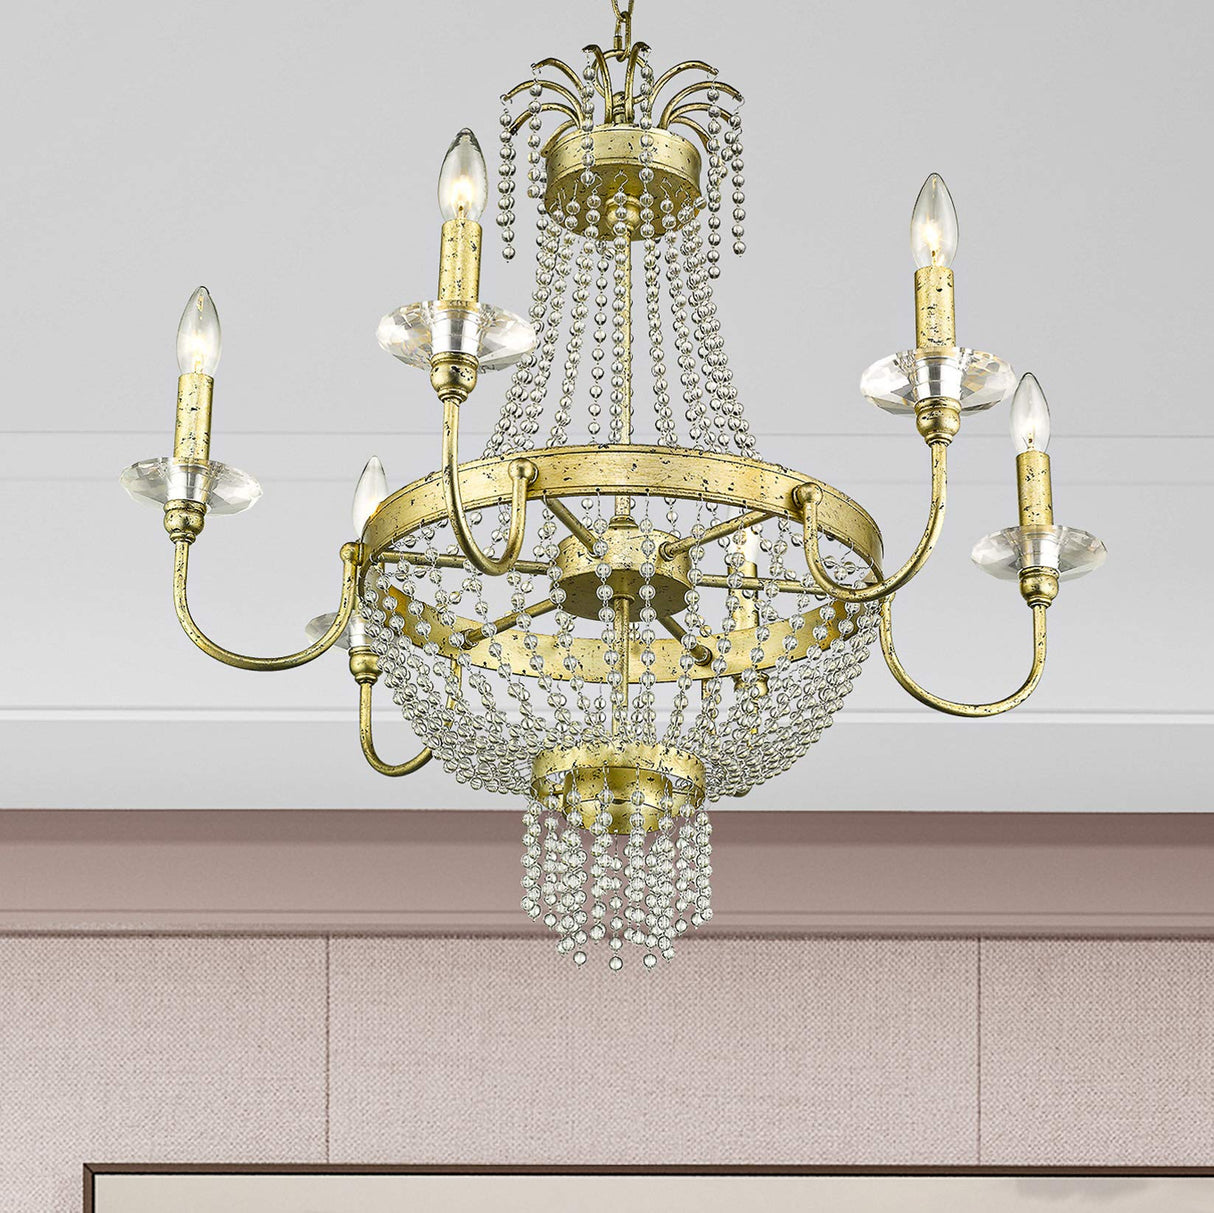 Livex Lighting 51846-91 Crystal Six Light Chandelier from Valentina Collection in Pwt, Nckl, B/S, Slvr. Finish, Brushed Nickel